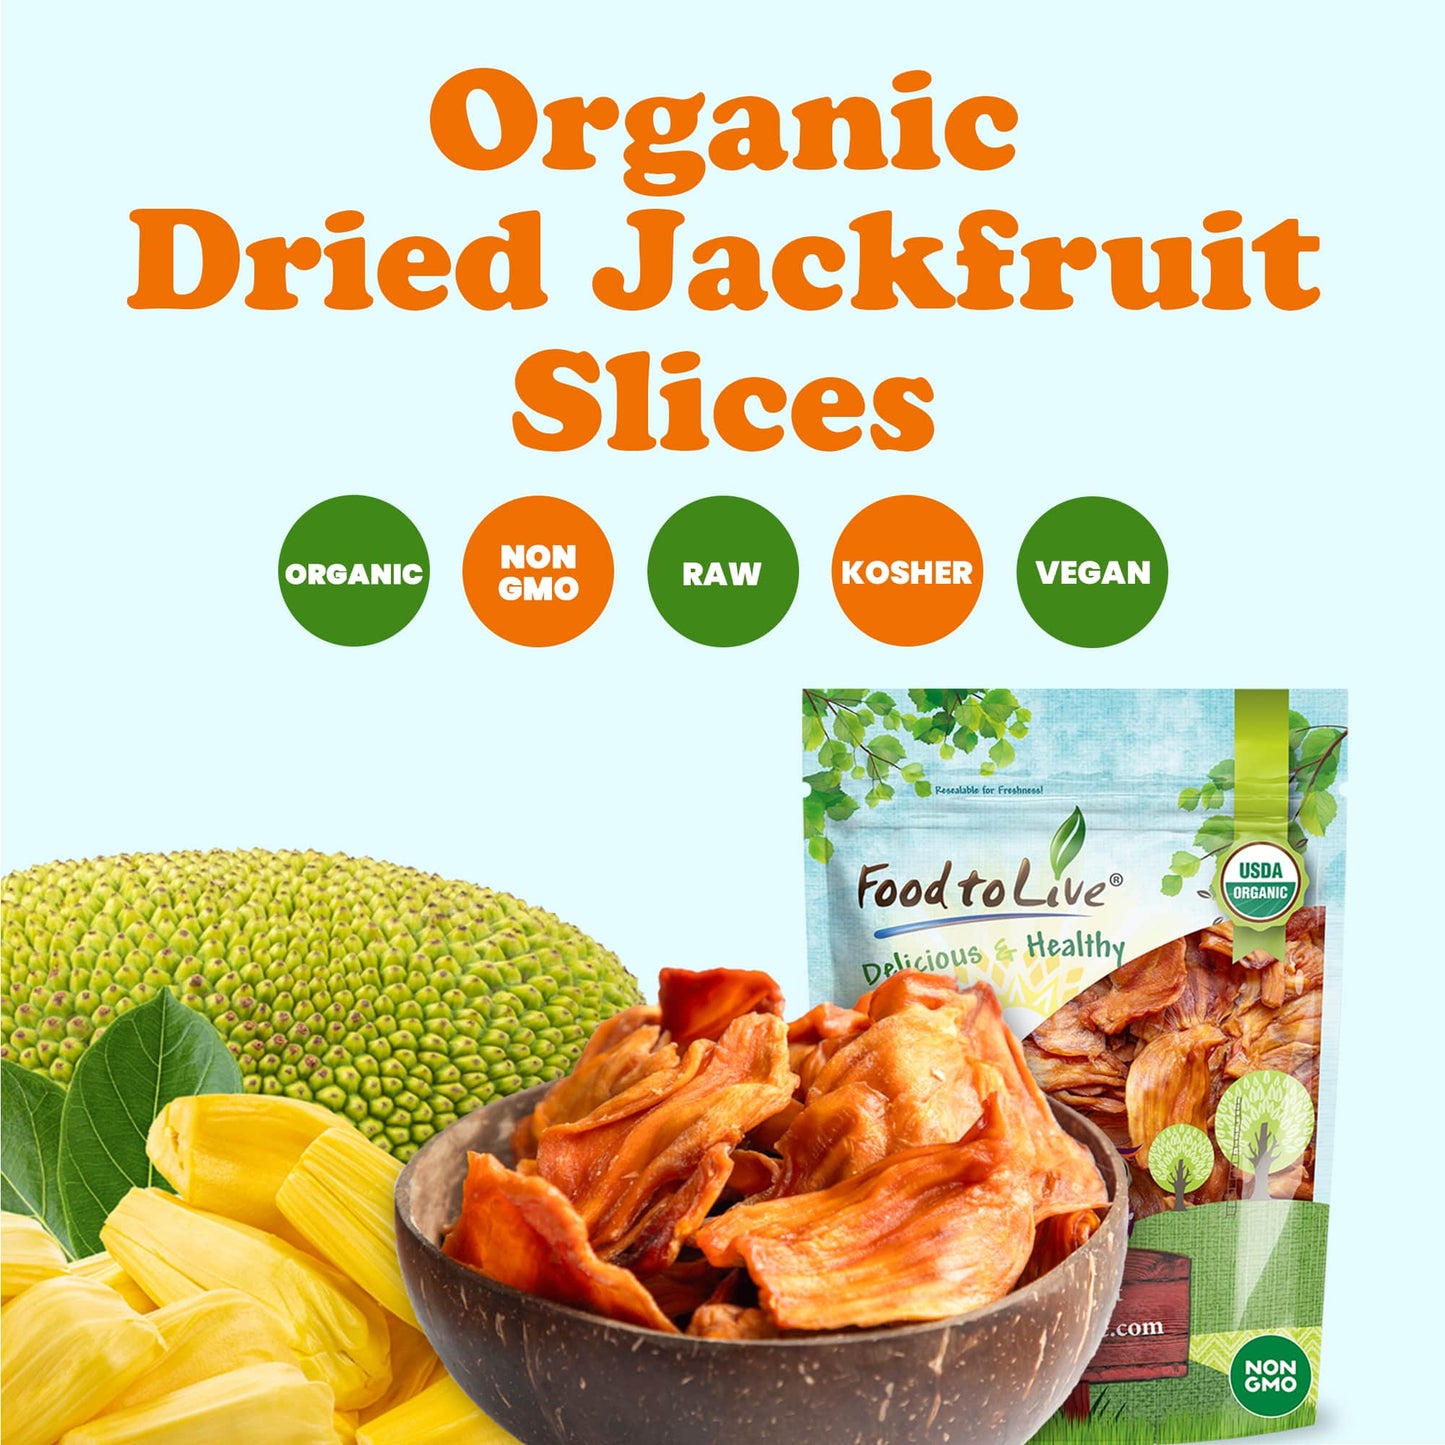 Organic Dried Jackfruit Slices – Non-GMO Chewy Snack for Kids and Adults, Unsweetened, Unsulfured, Nutritious Vegan Superfood in Bulk, Kosher